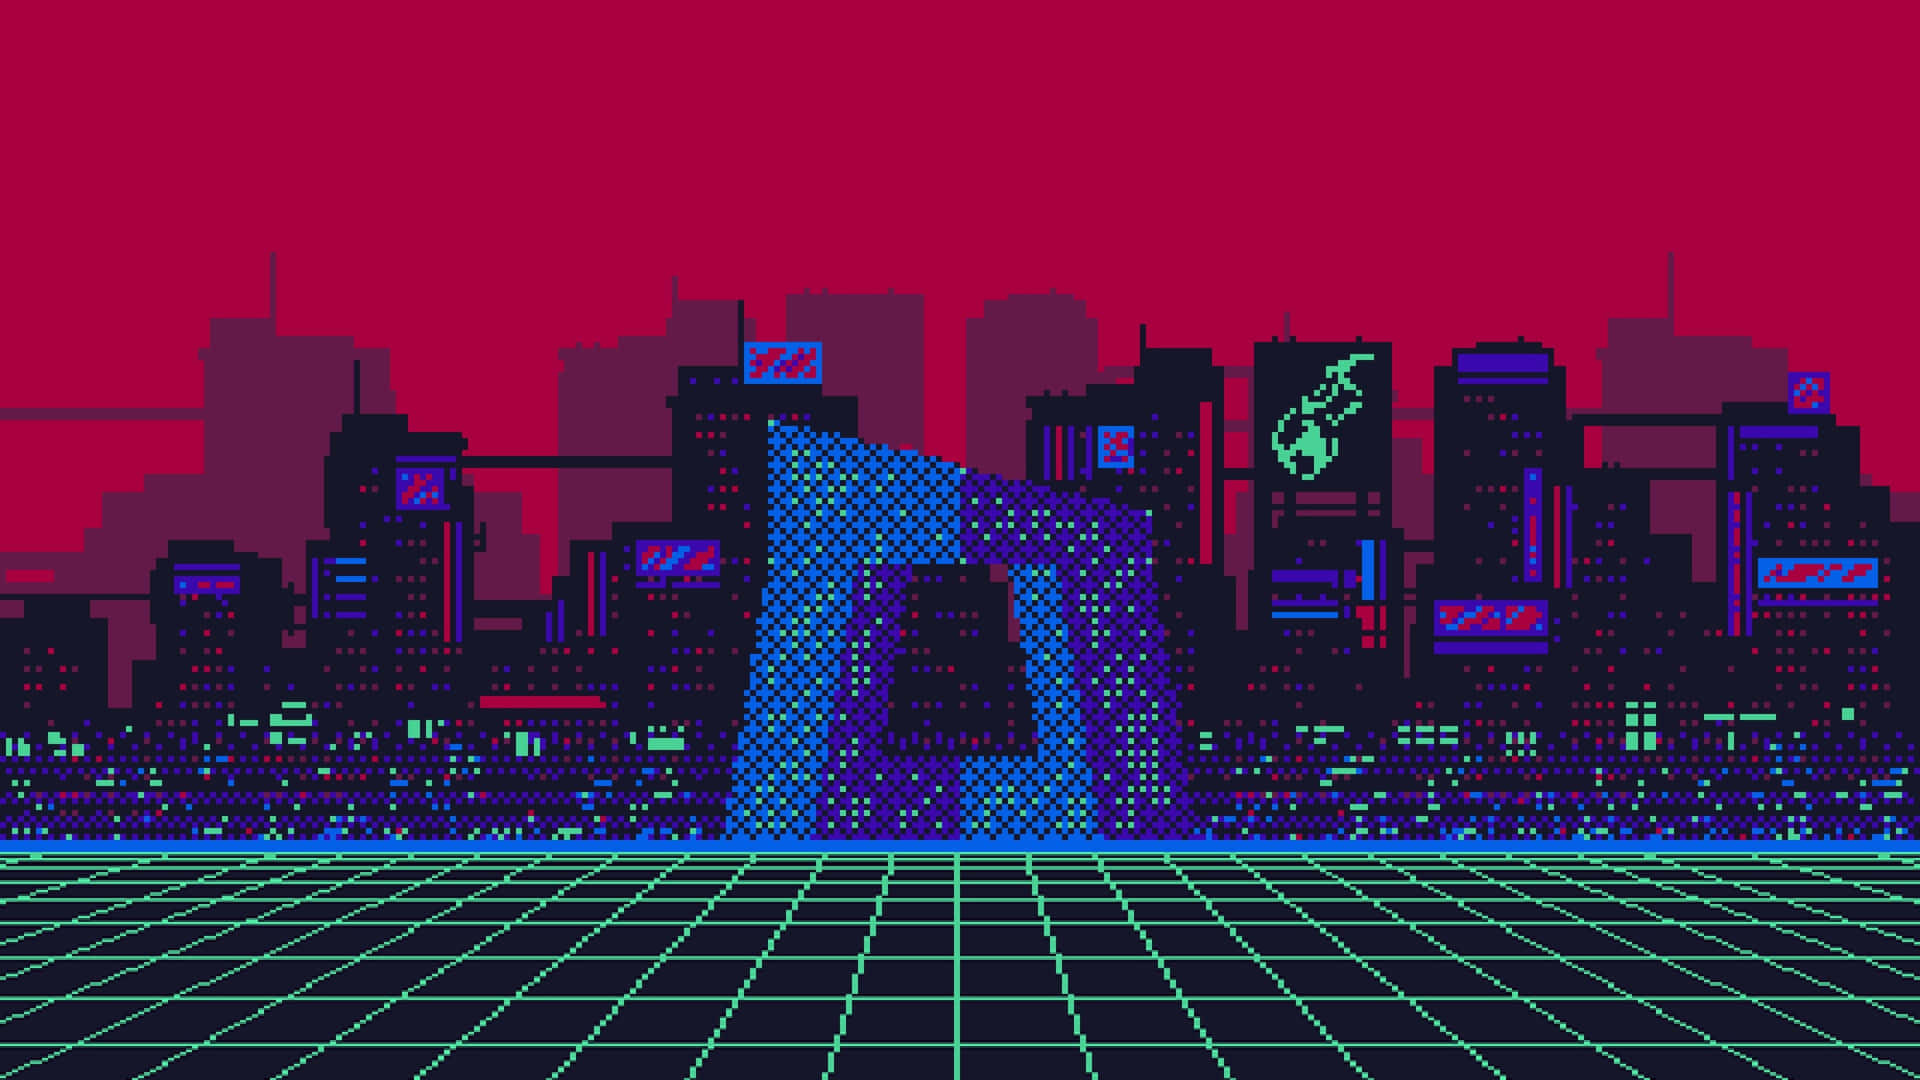 “Welcome to the future of Cyberpunk Pixel Art” Wallpaper